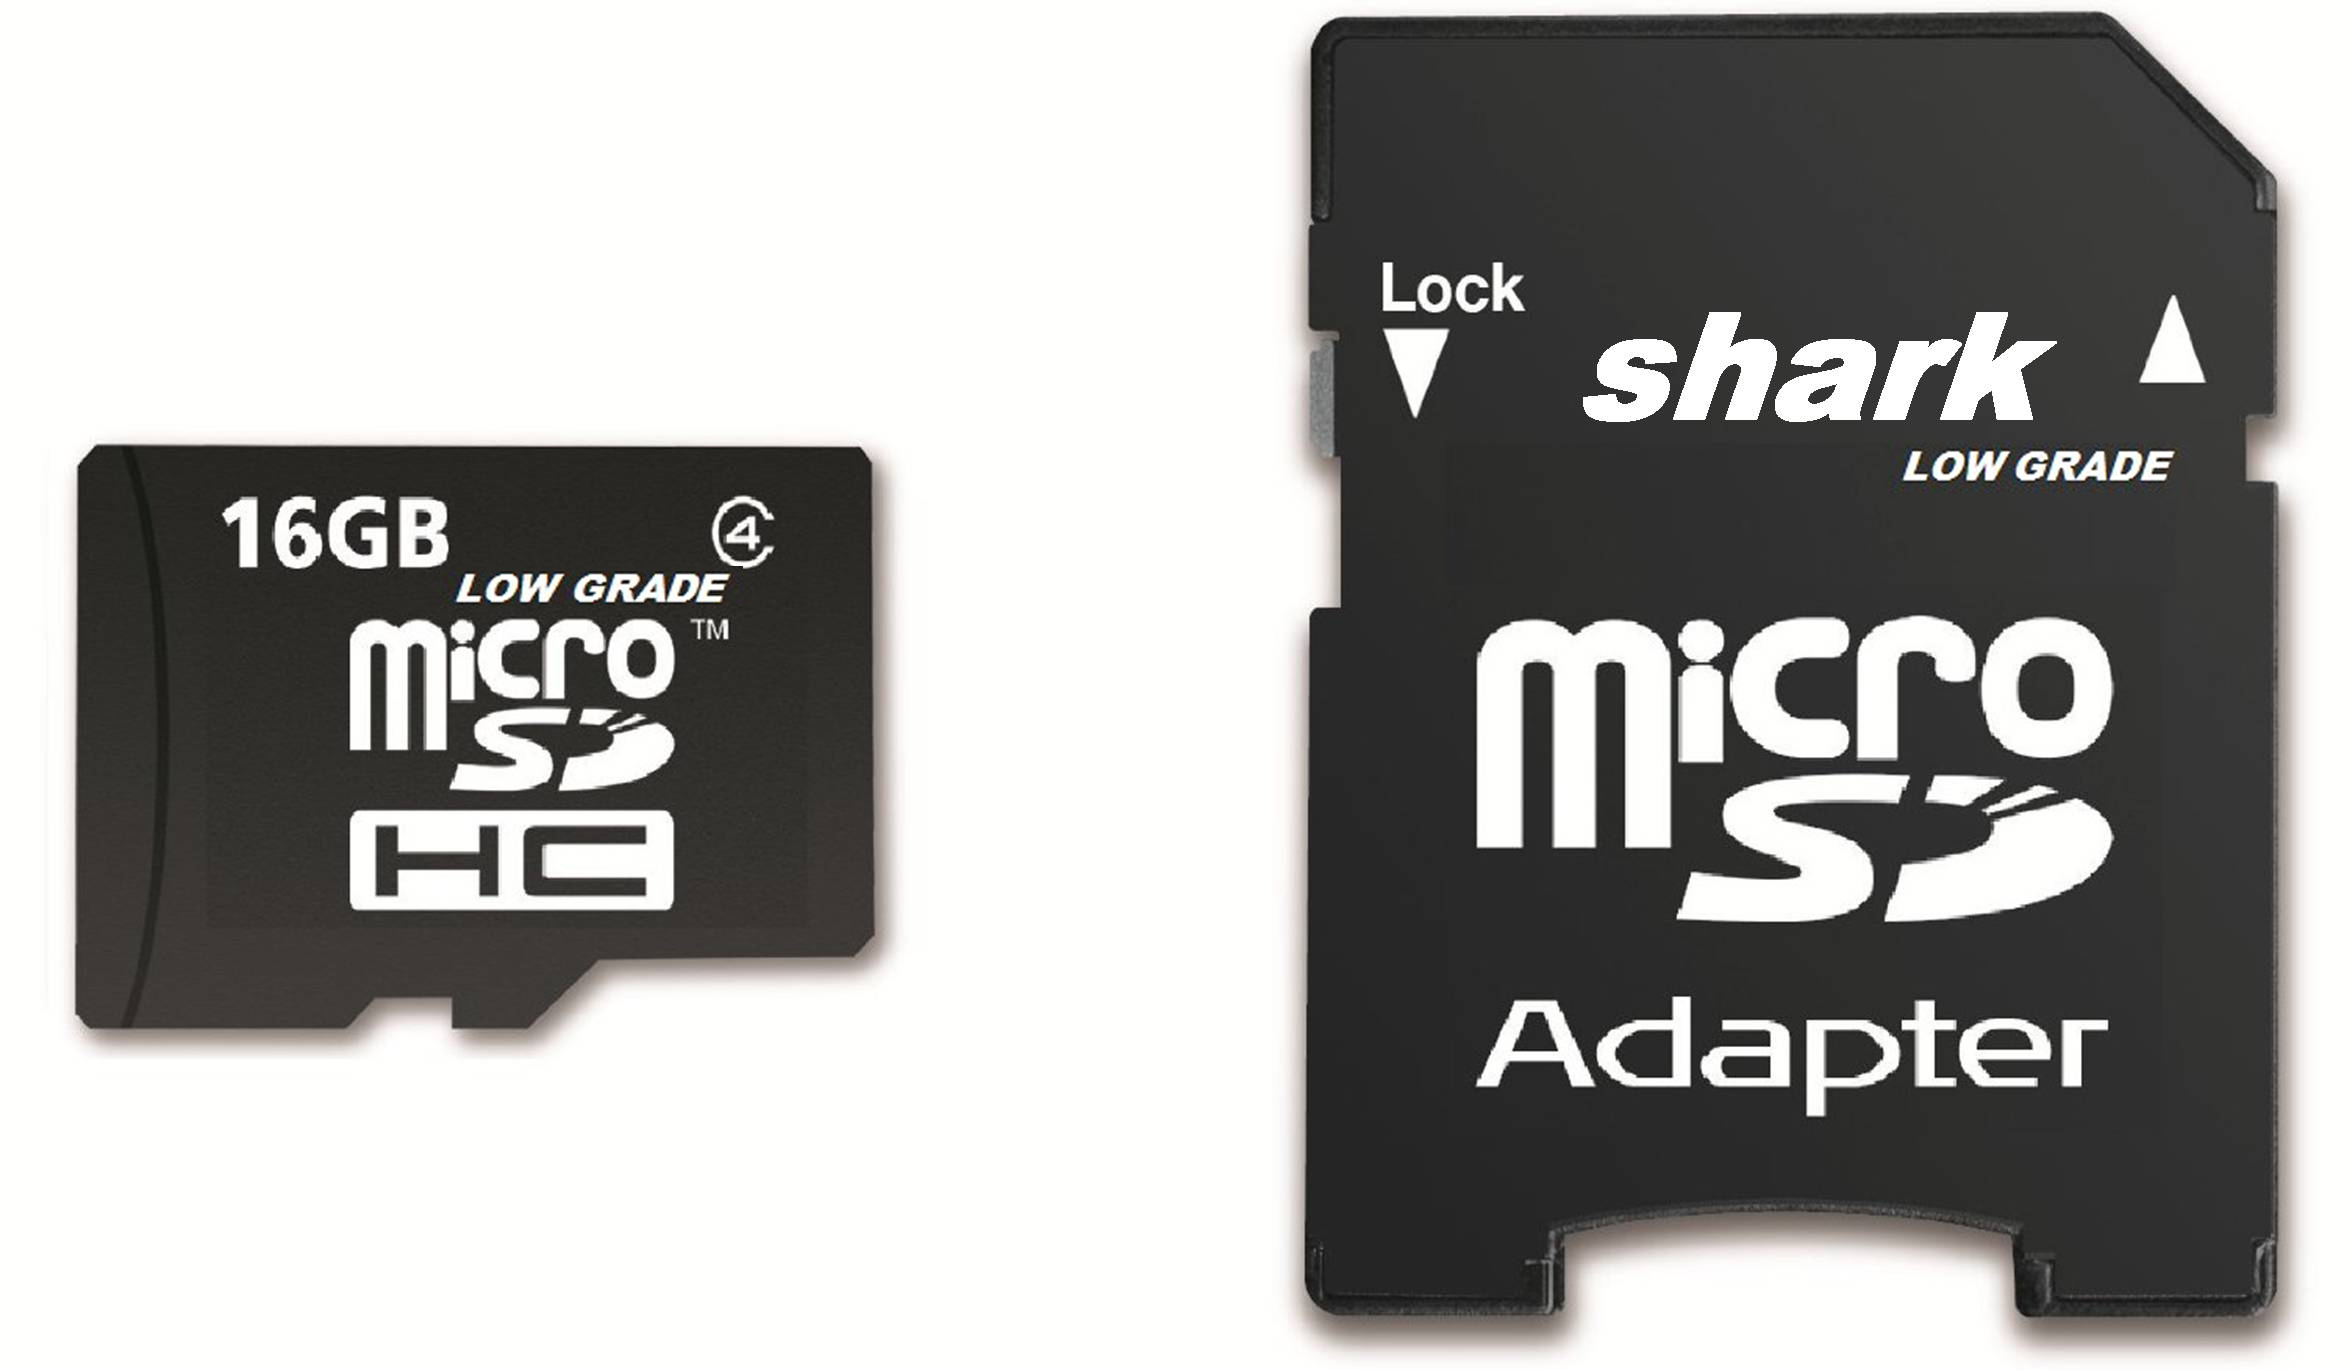 Shark Memory 8GB Class 4 Micro SDHC Memory Card with SD Adapter